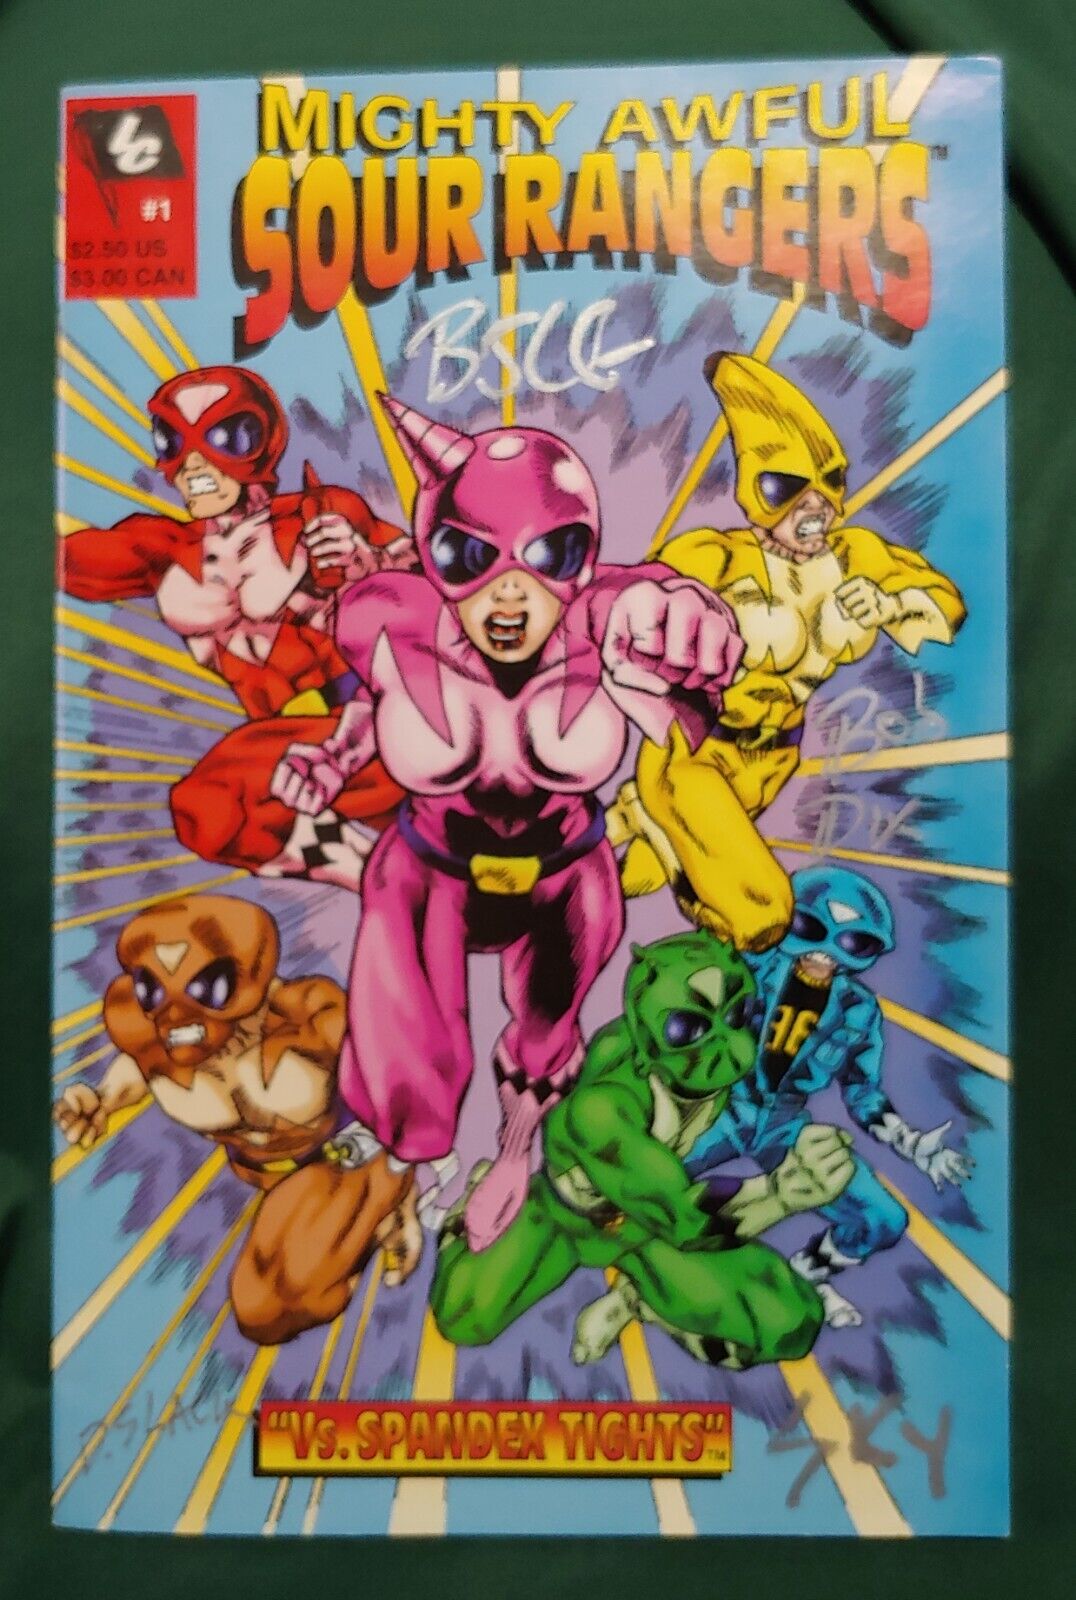 #1 Mighty Awful Sour Rangers Comic Book Signed By B.J.L.G. / Sky / Bob / D.Slack